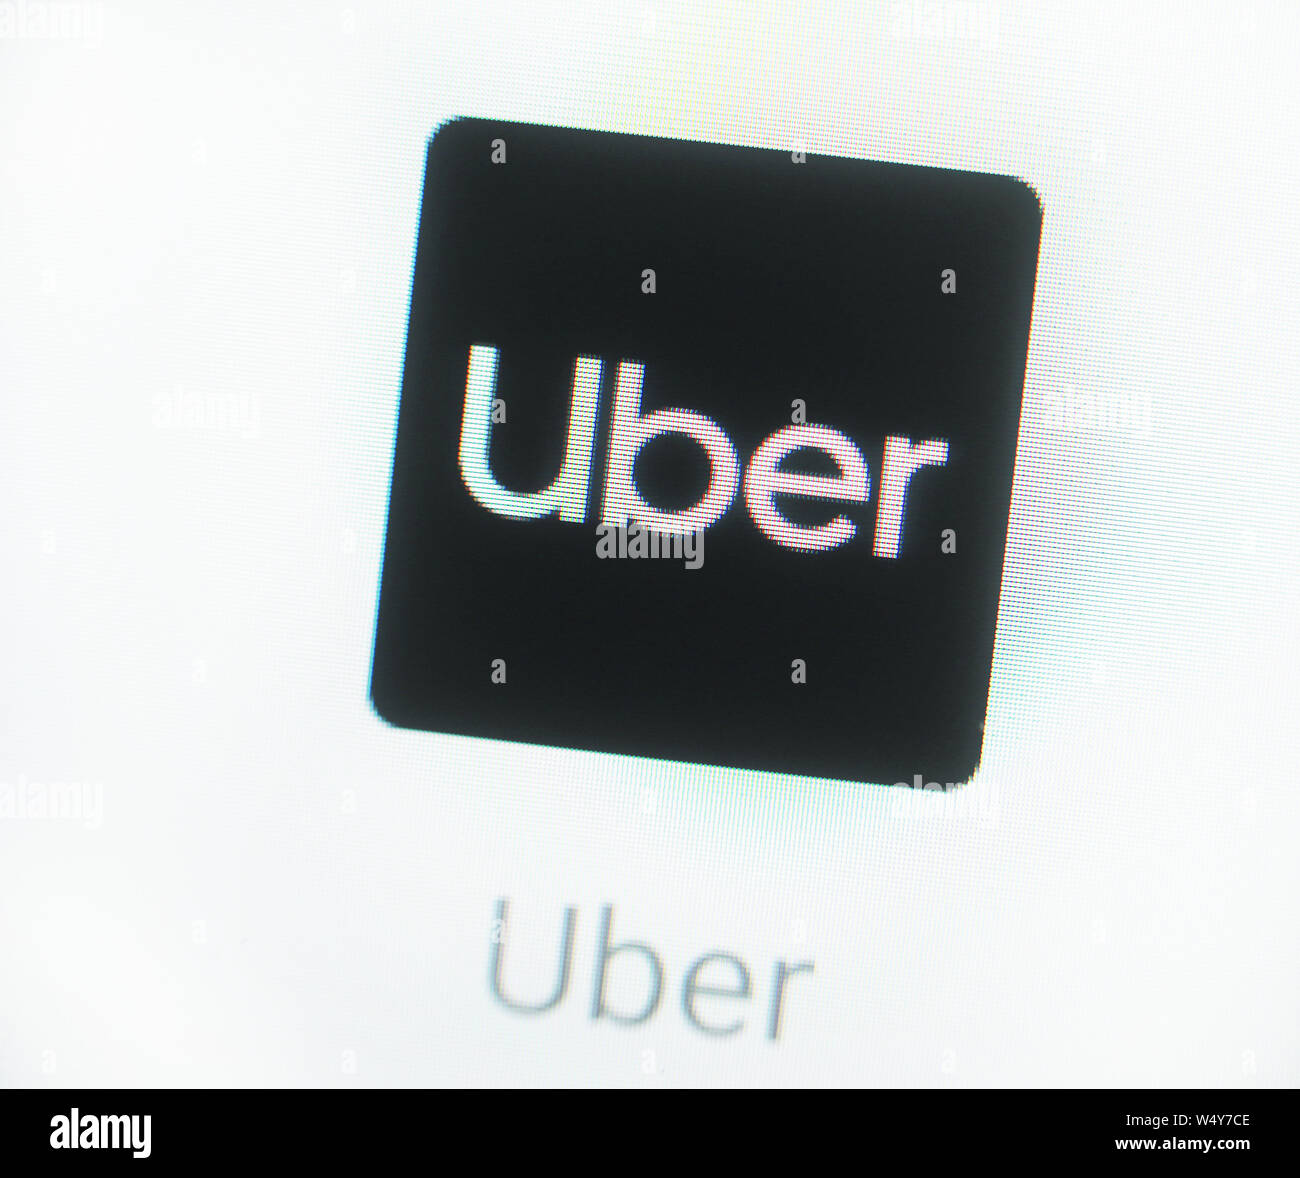 Uber application icon on computer display. Uber Technologies, Inc. is an American multinational transportation network company Stock Photo